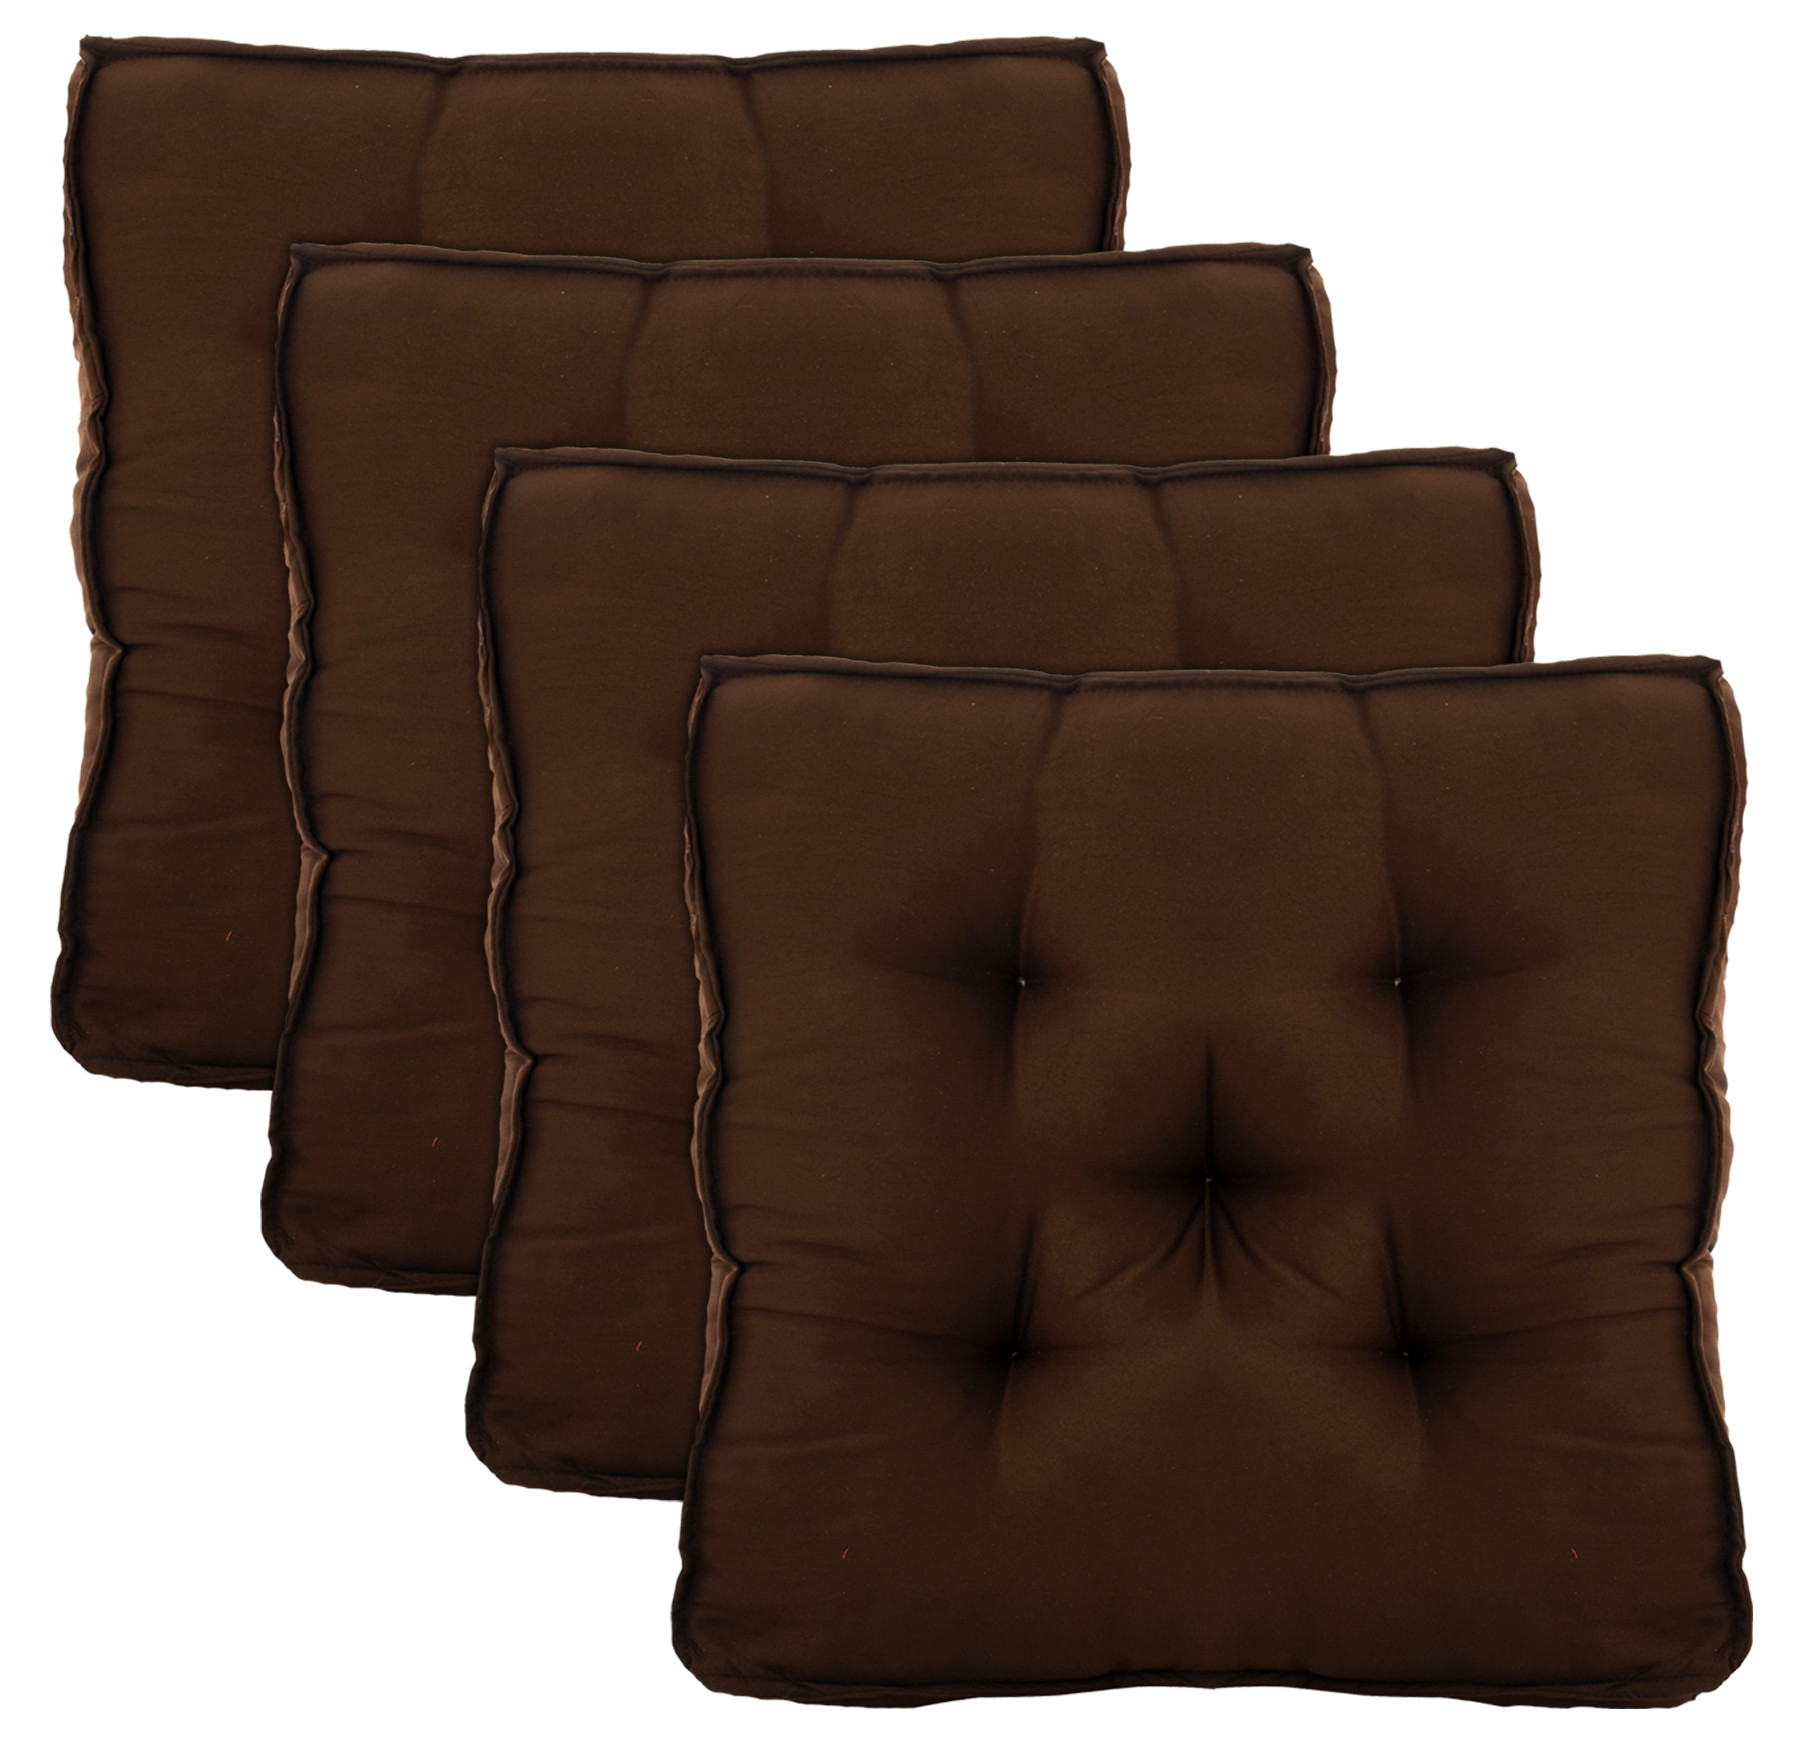 Kuber Industries Microfiber Square Chair Pad Seat Cushion For Car Pad, Office Chair, Indoor/Outdoor, Dining Living Room, Kitchen, 18*18 Inch (Brown)